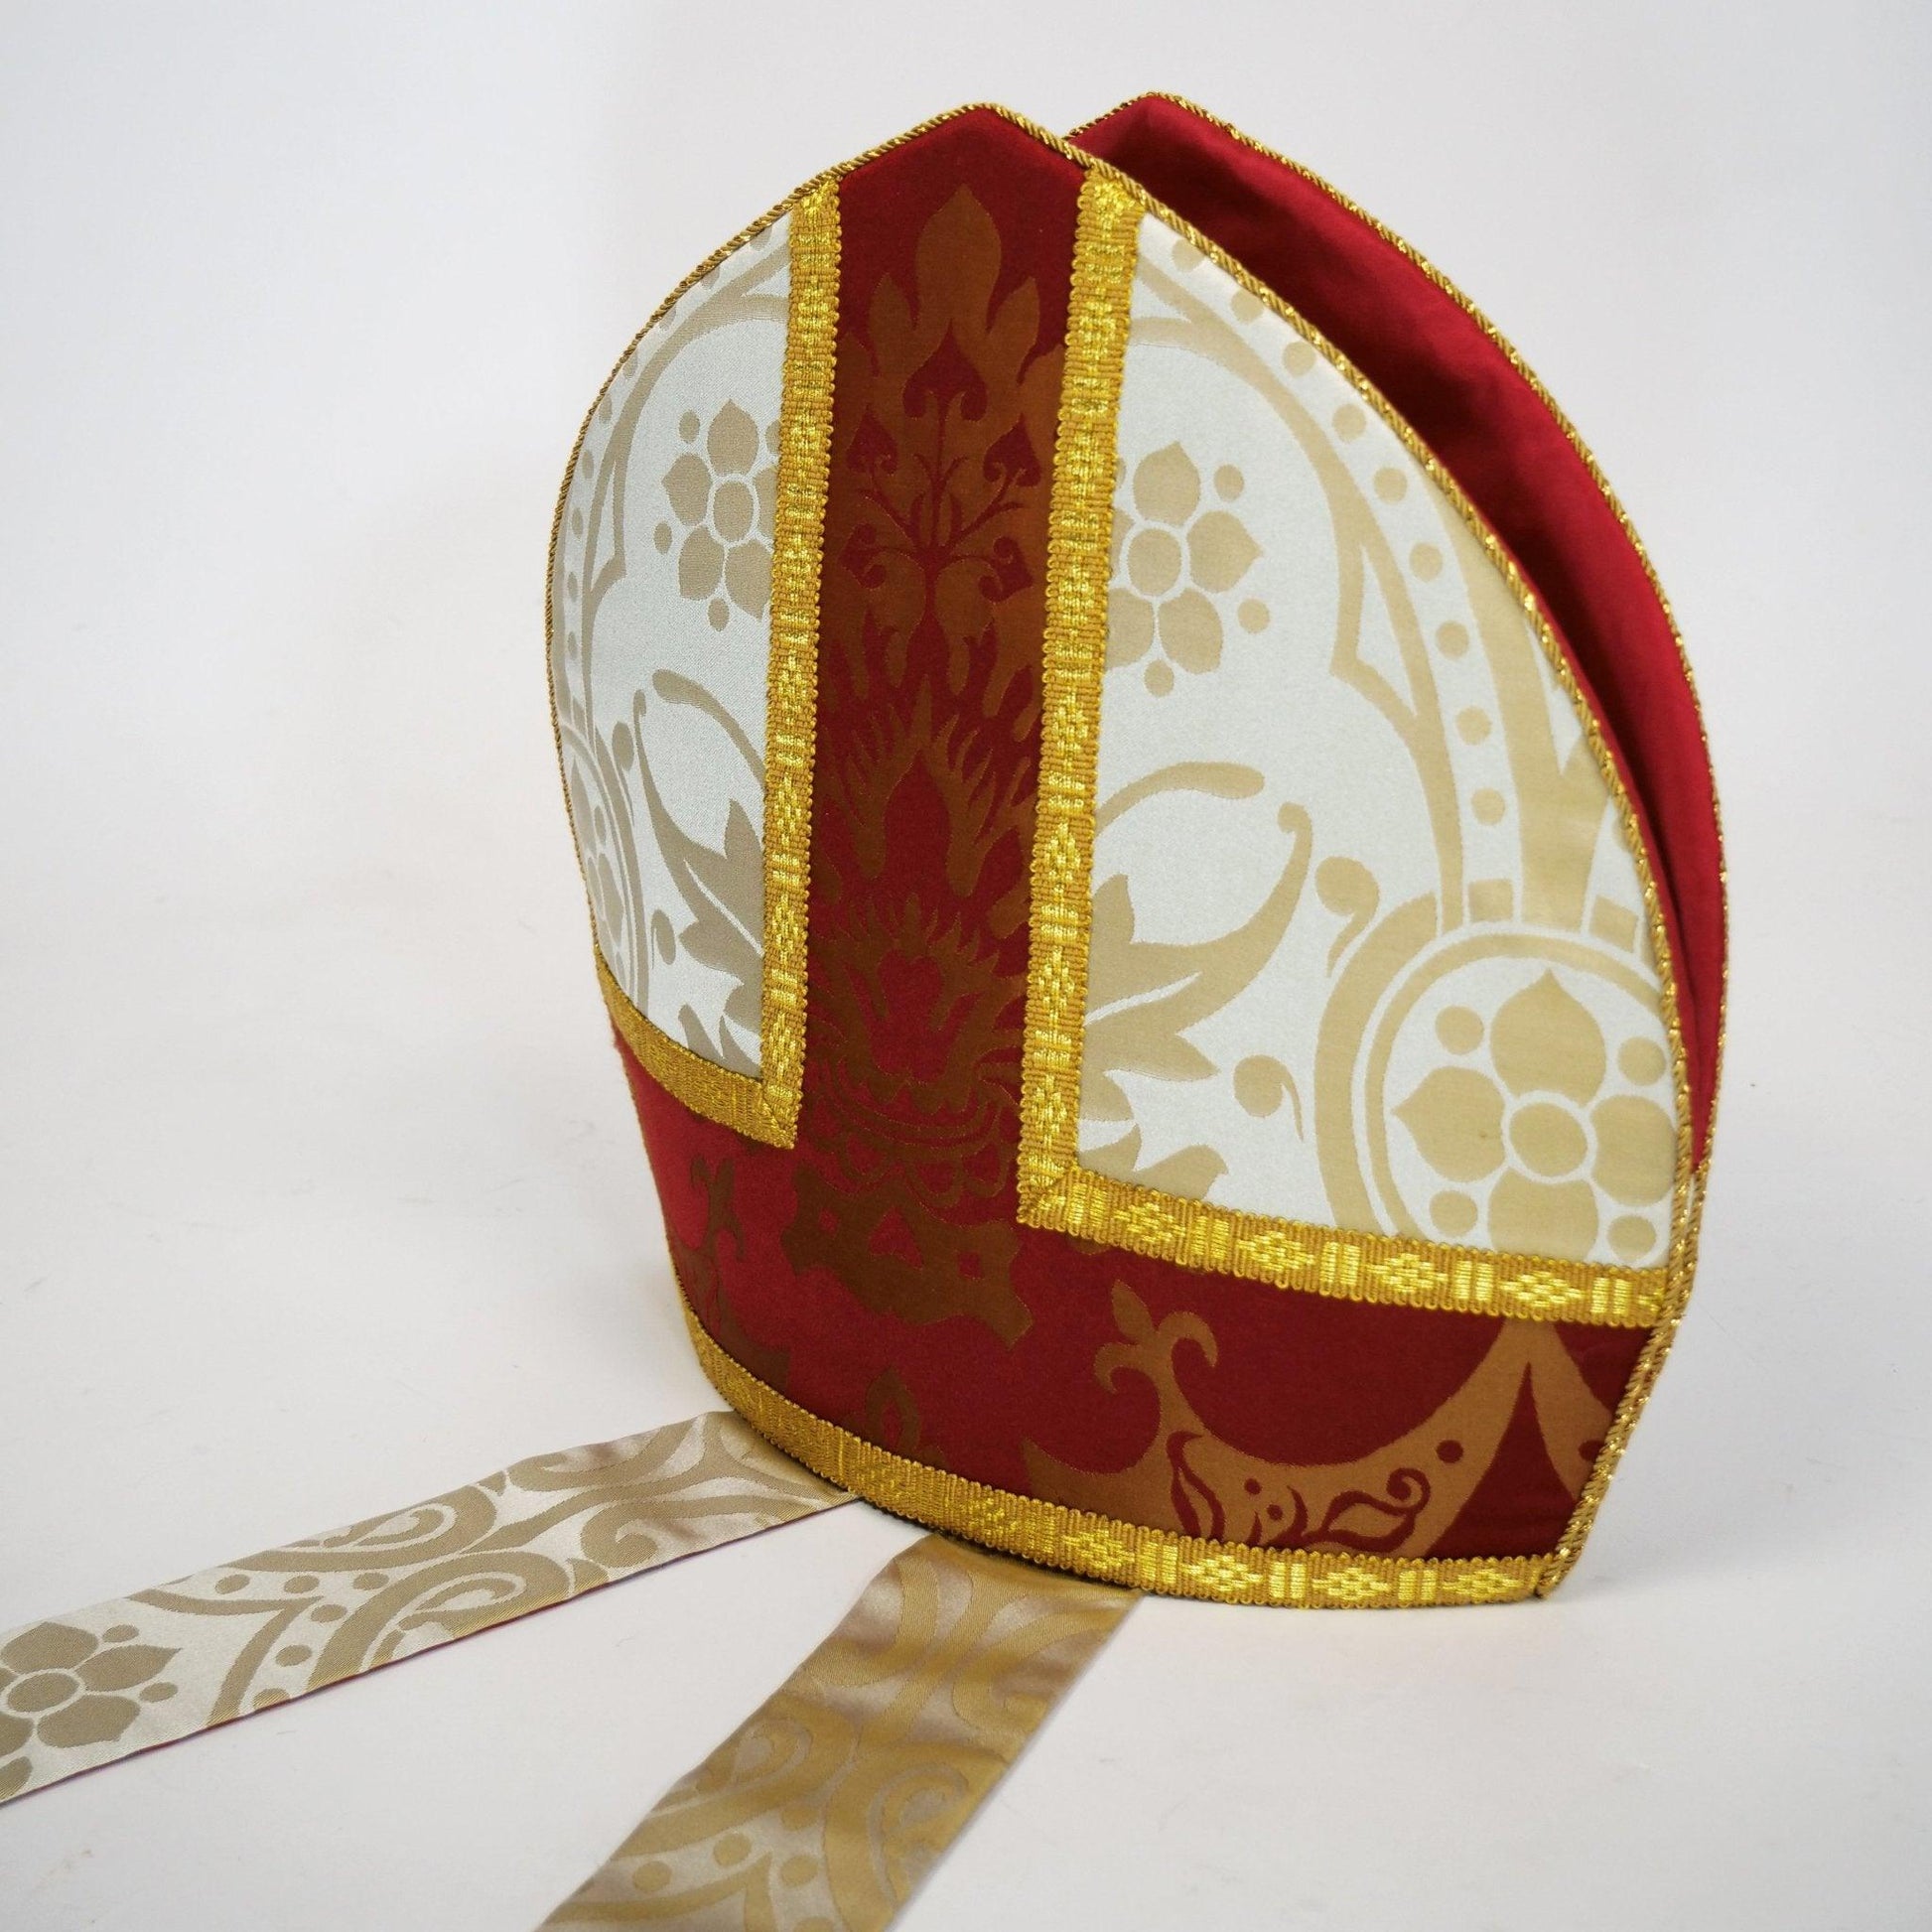 Prinknash Mitre in Oyster 'Shrewsbury' with Sarum Red/Gold 'Gothic' Orphreys - Watts & Co.